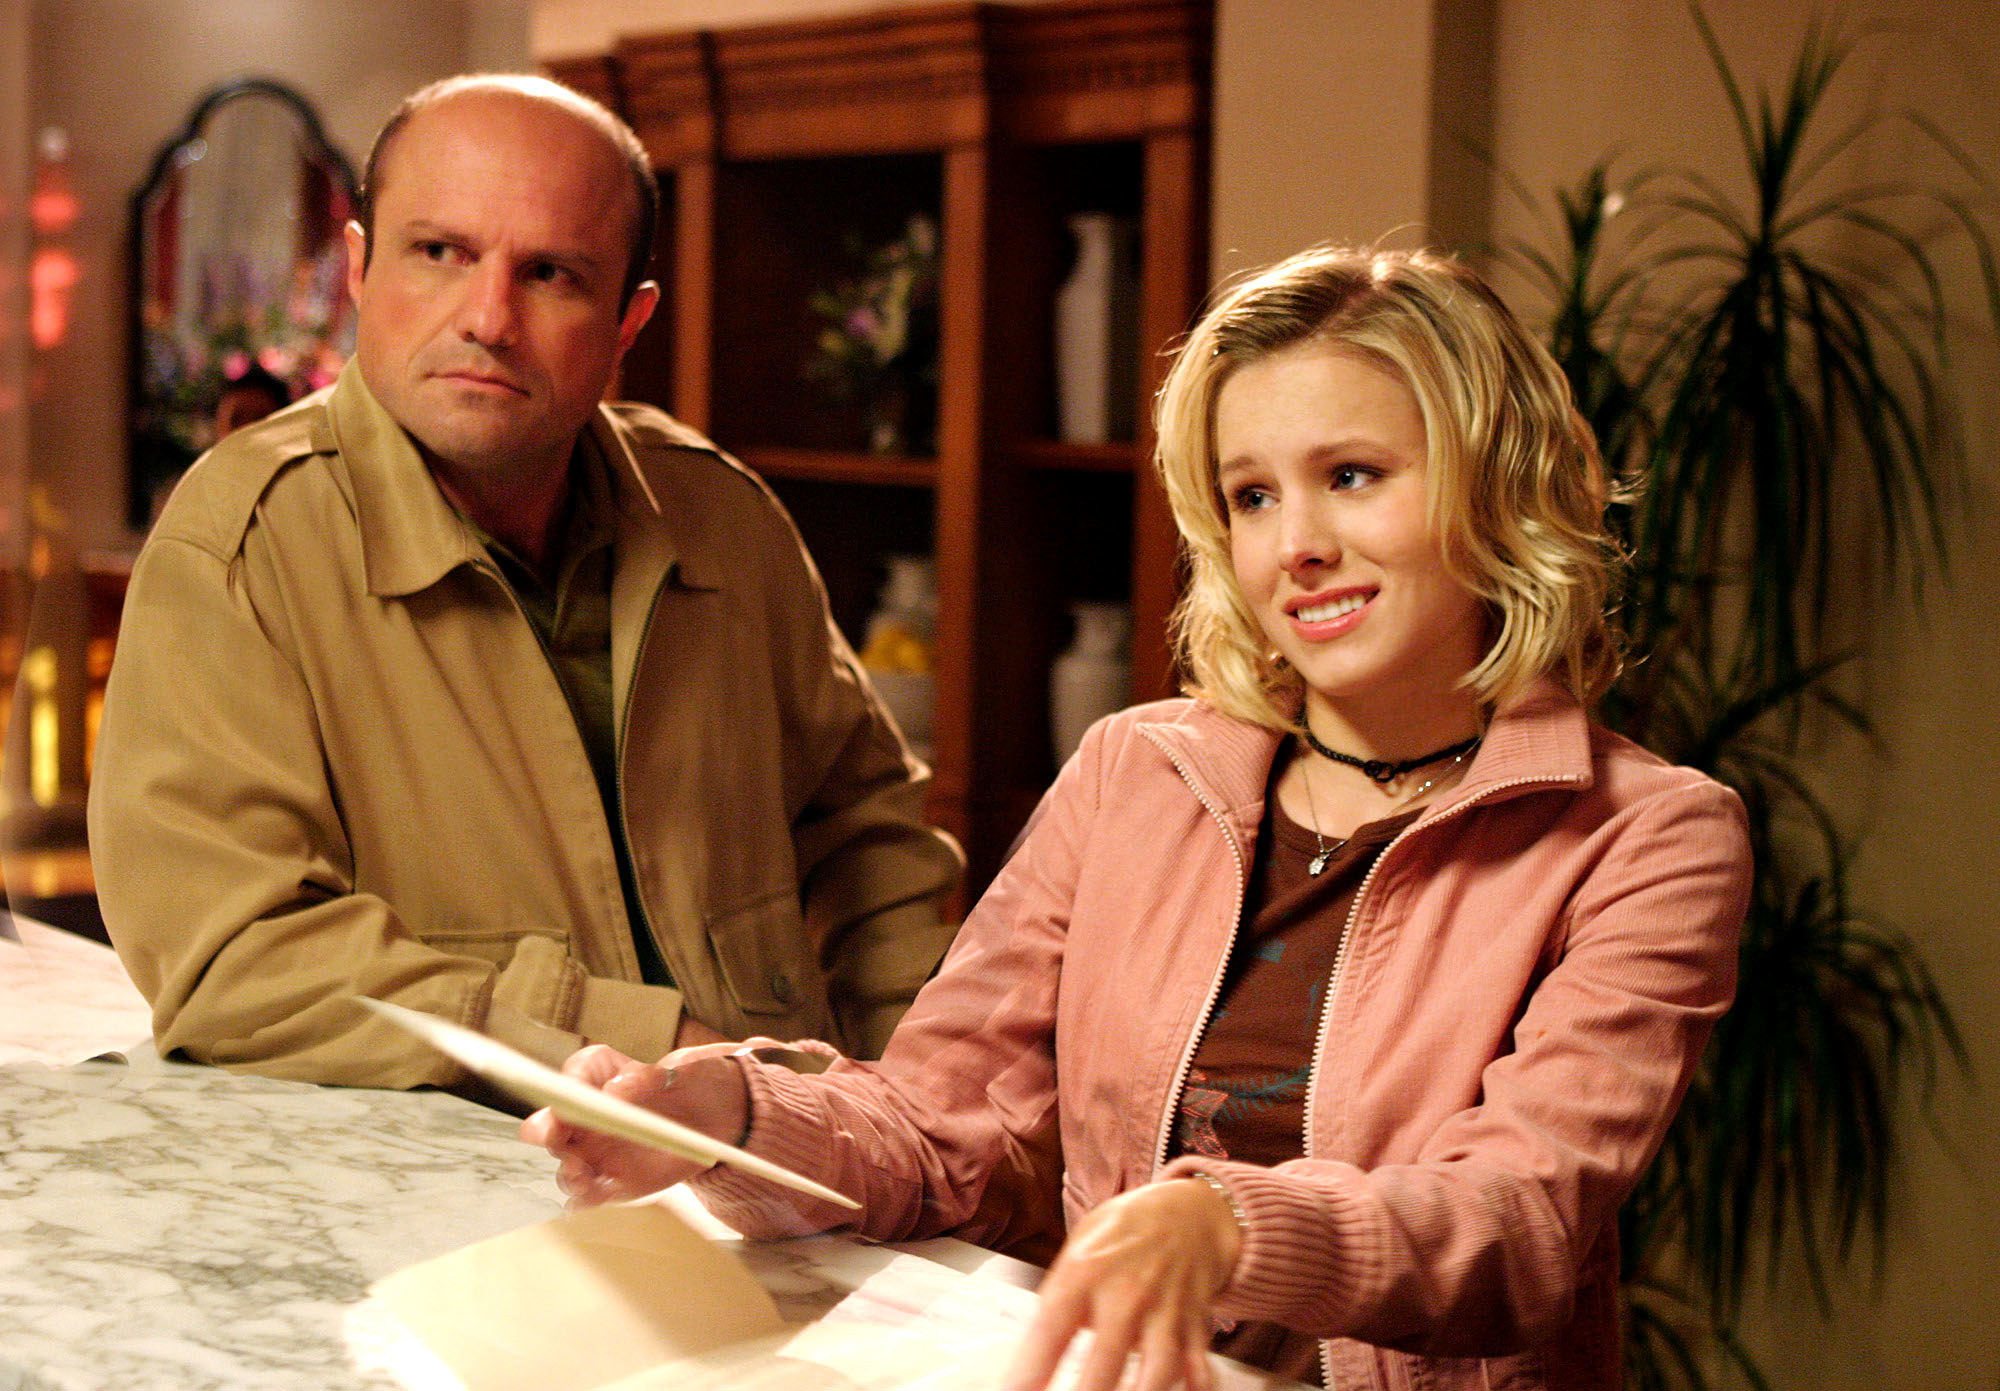 Enrico Colantoni and Kristen Bell looking confused